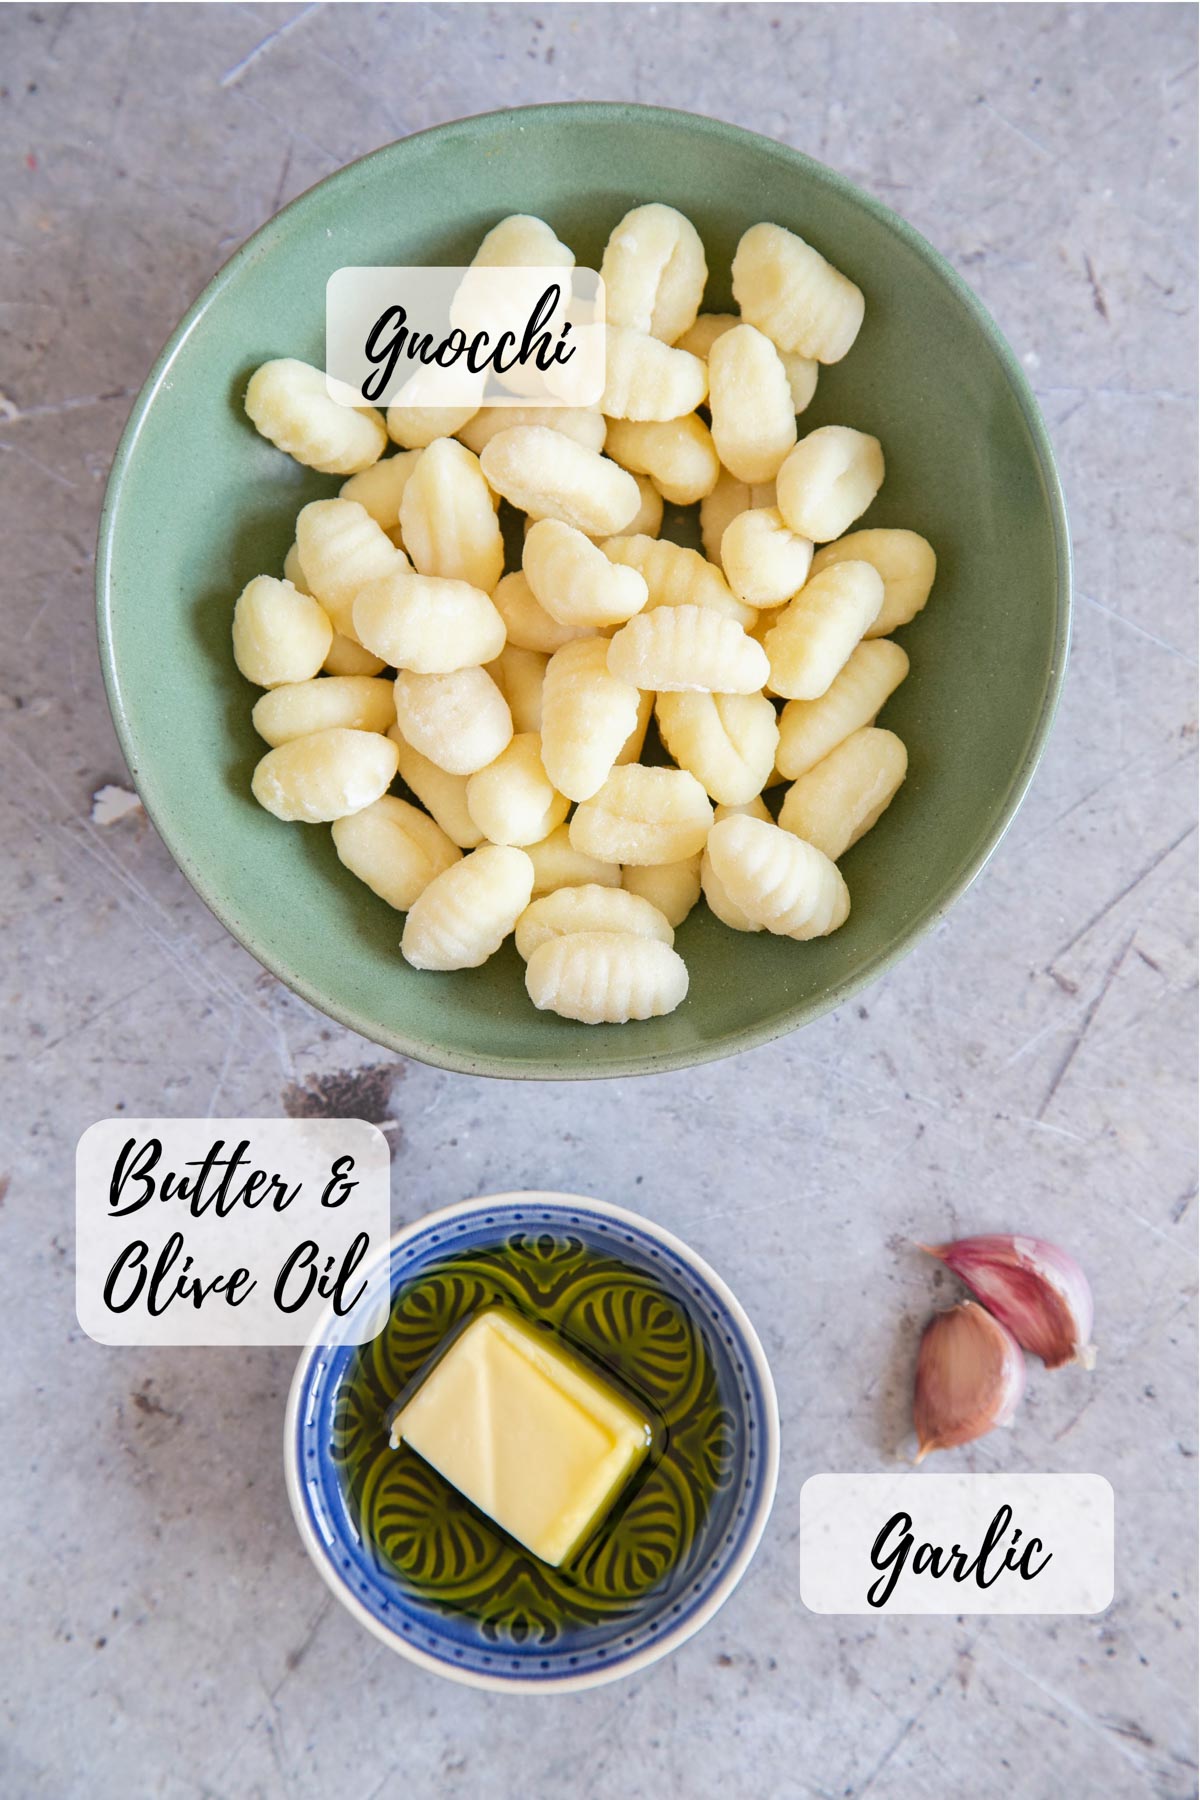 Ingredients for crispy fried gnocchi: a pack of gnocchi, garlic, butter and oil.